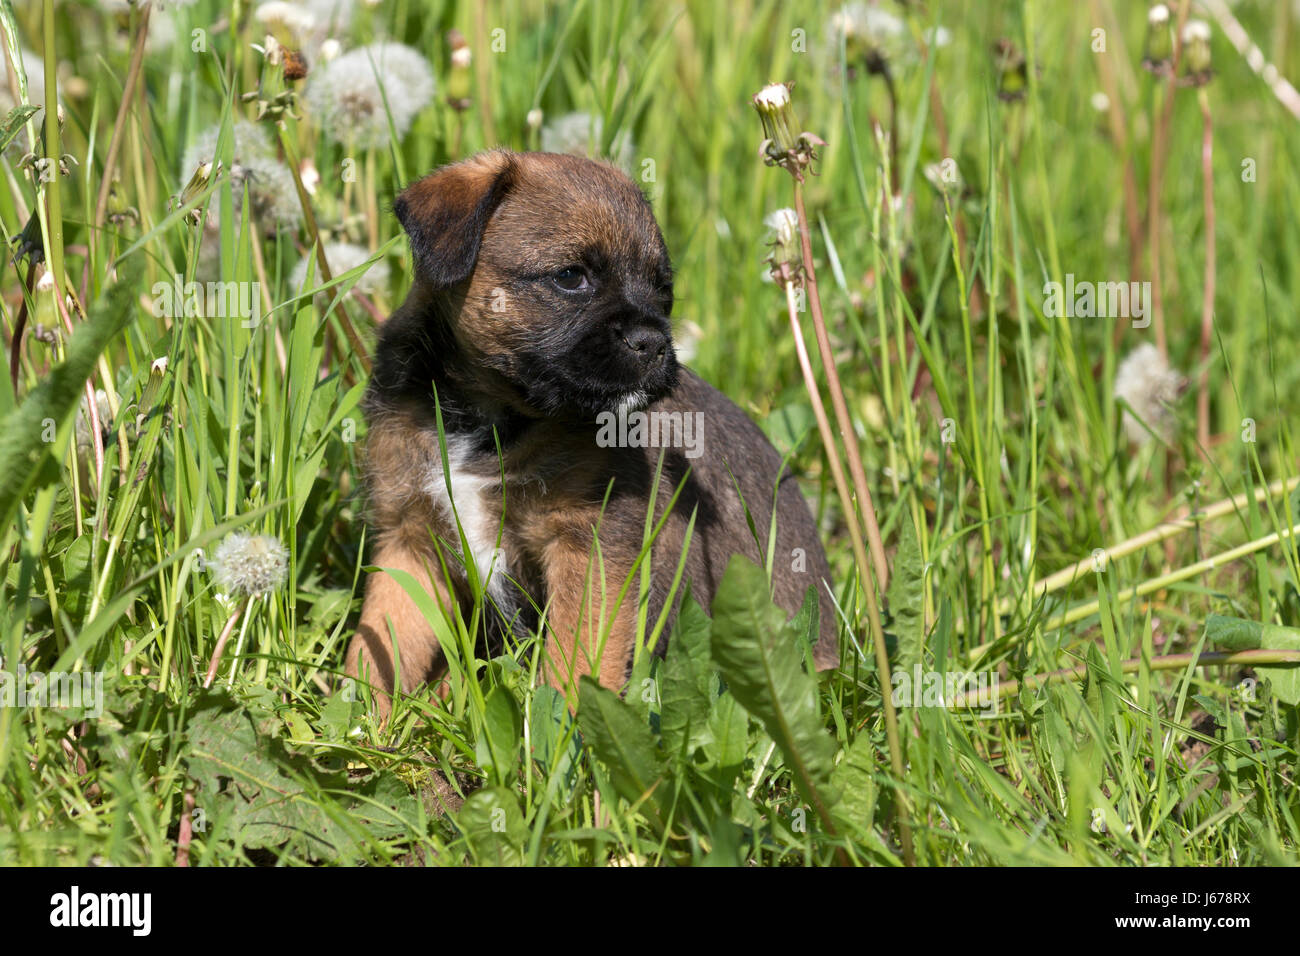 Border Terrier Puppy, 7 weeks old Stock Photo